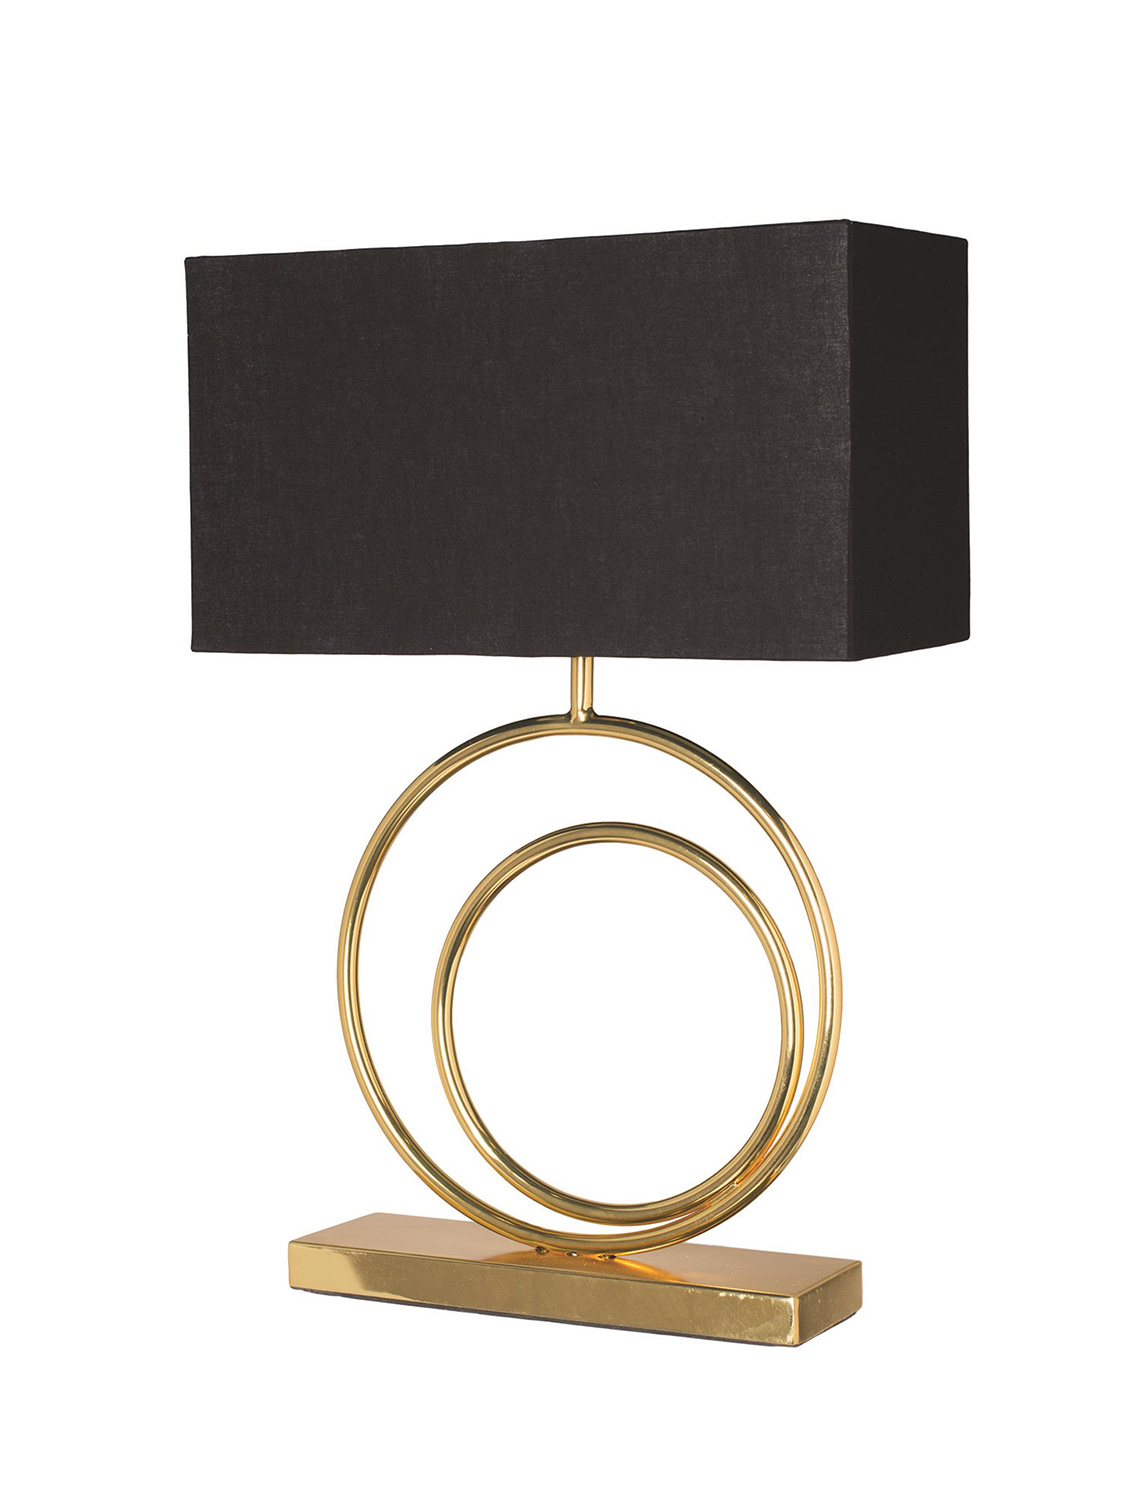 Ren-Wil Scion Table Lamp - Gold Plated